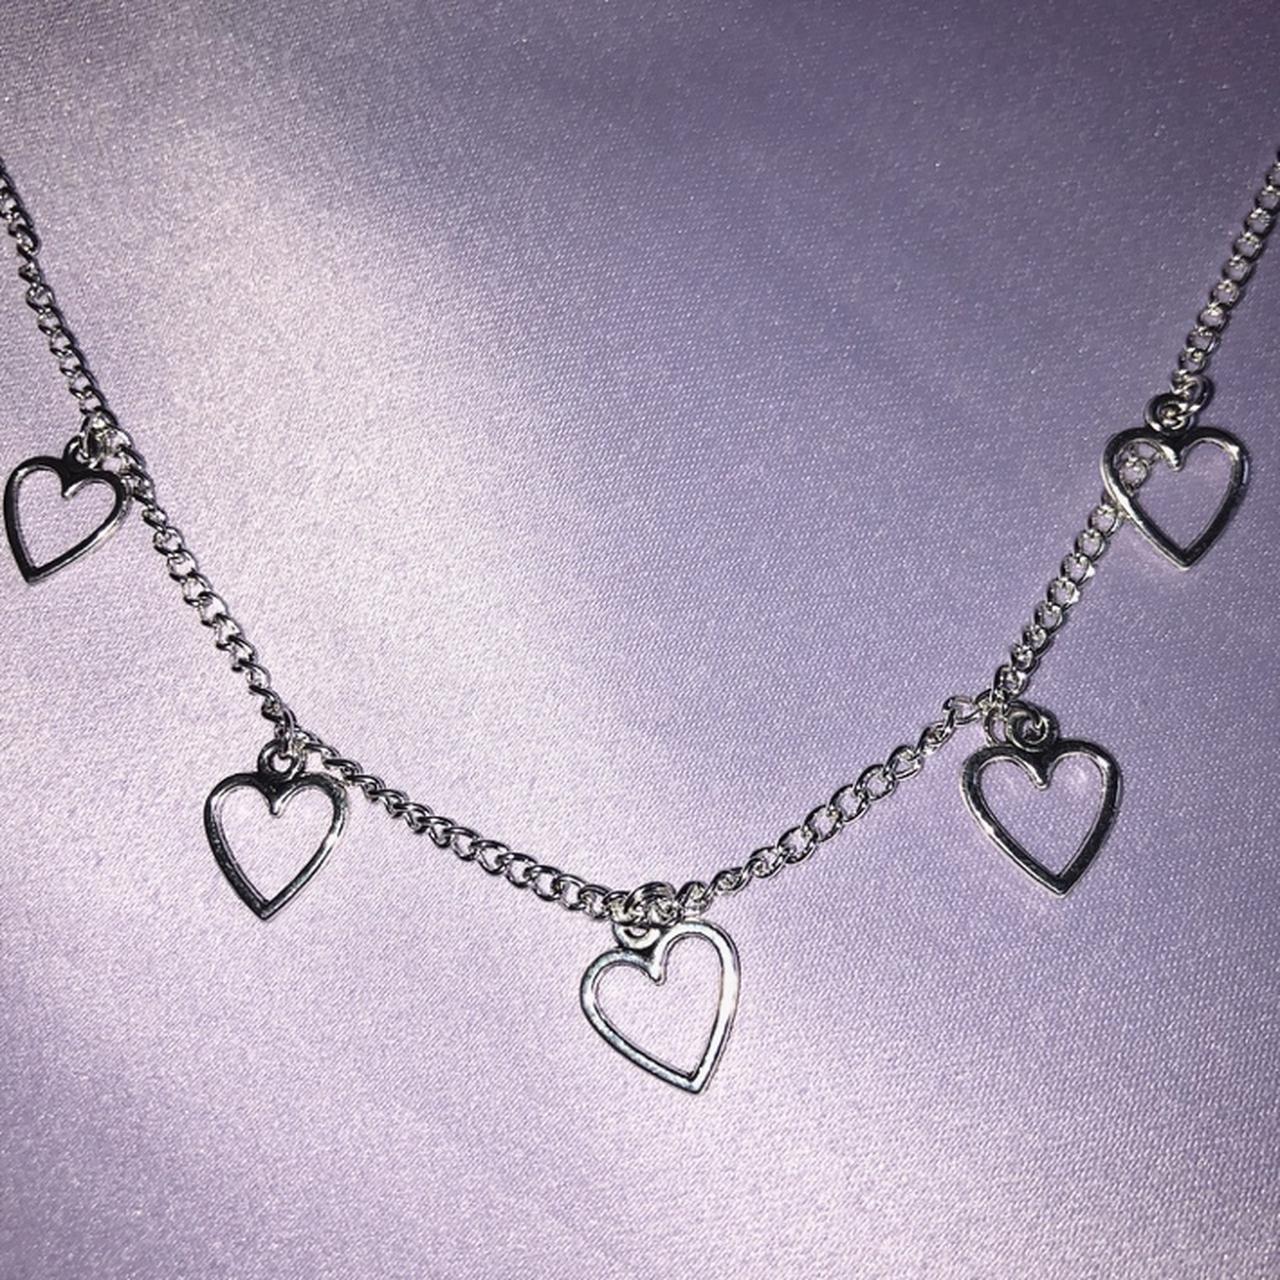 Handmade Silver Plated Heart Charm Necklace (x5... - Depop